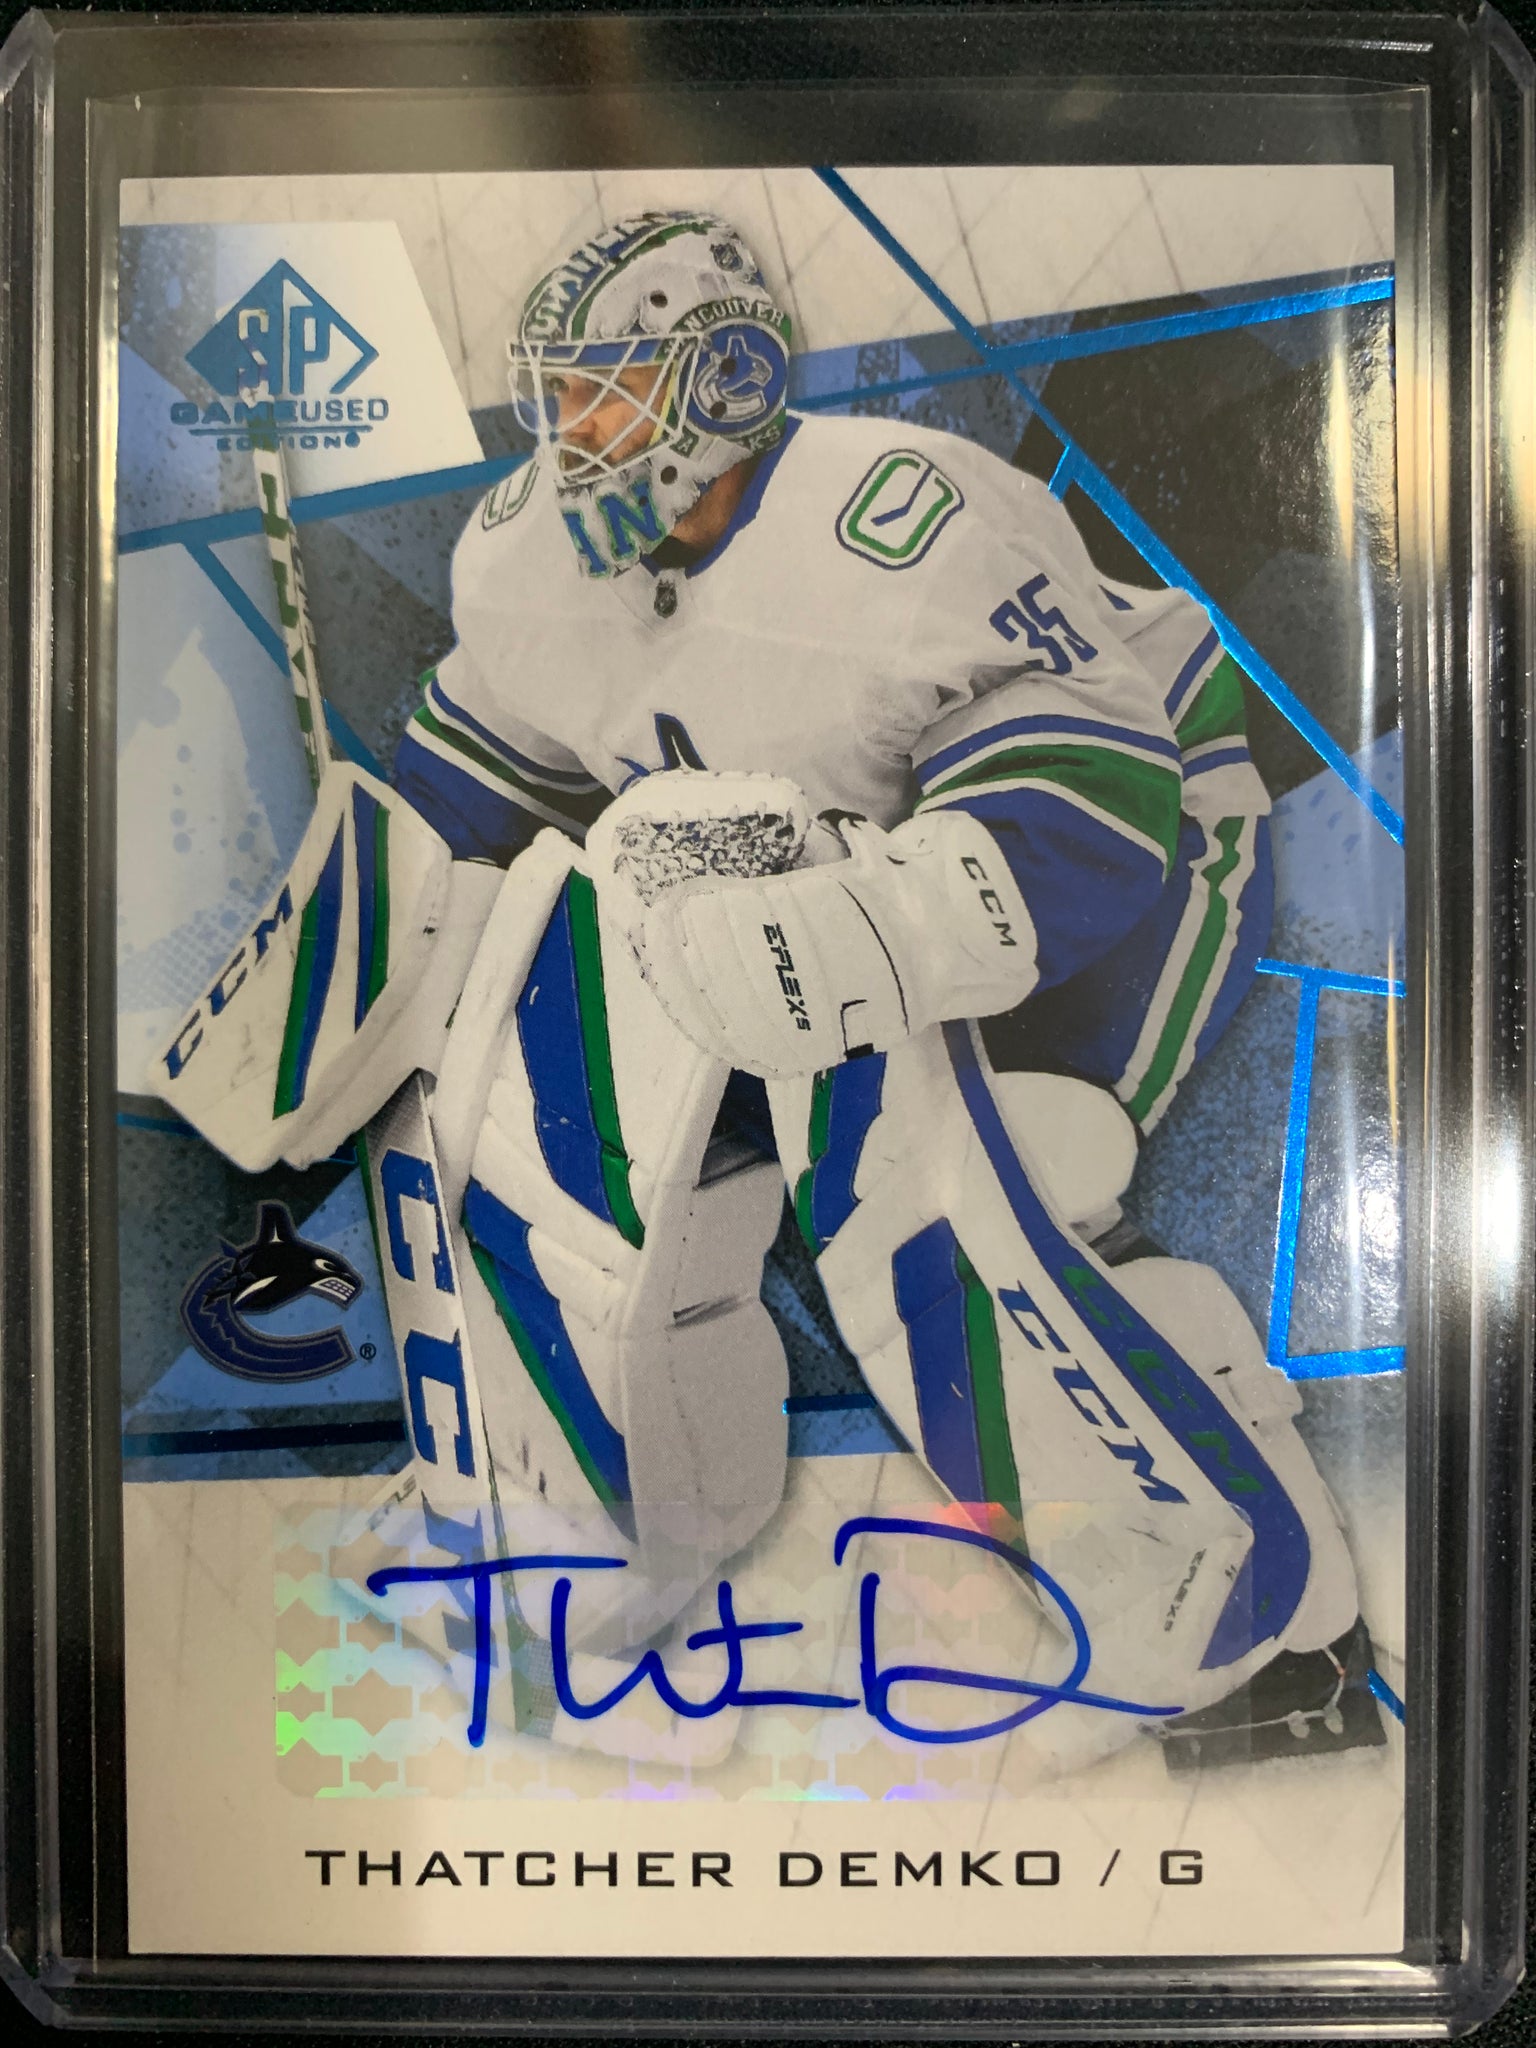 2021-22 UD SP GAME USED HOCKEY #33 VANCOUVER CANUCKS - THATCHER DEMKO GAME USED EDITION AUTOGRAPH